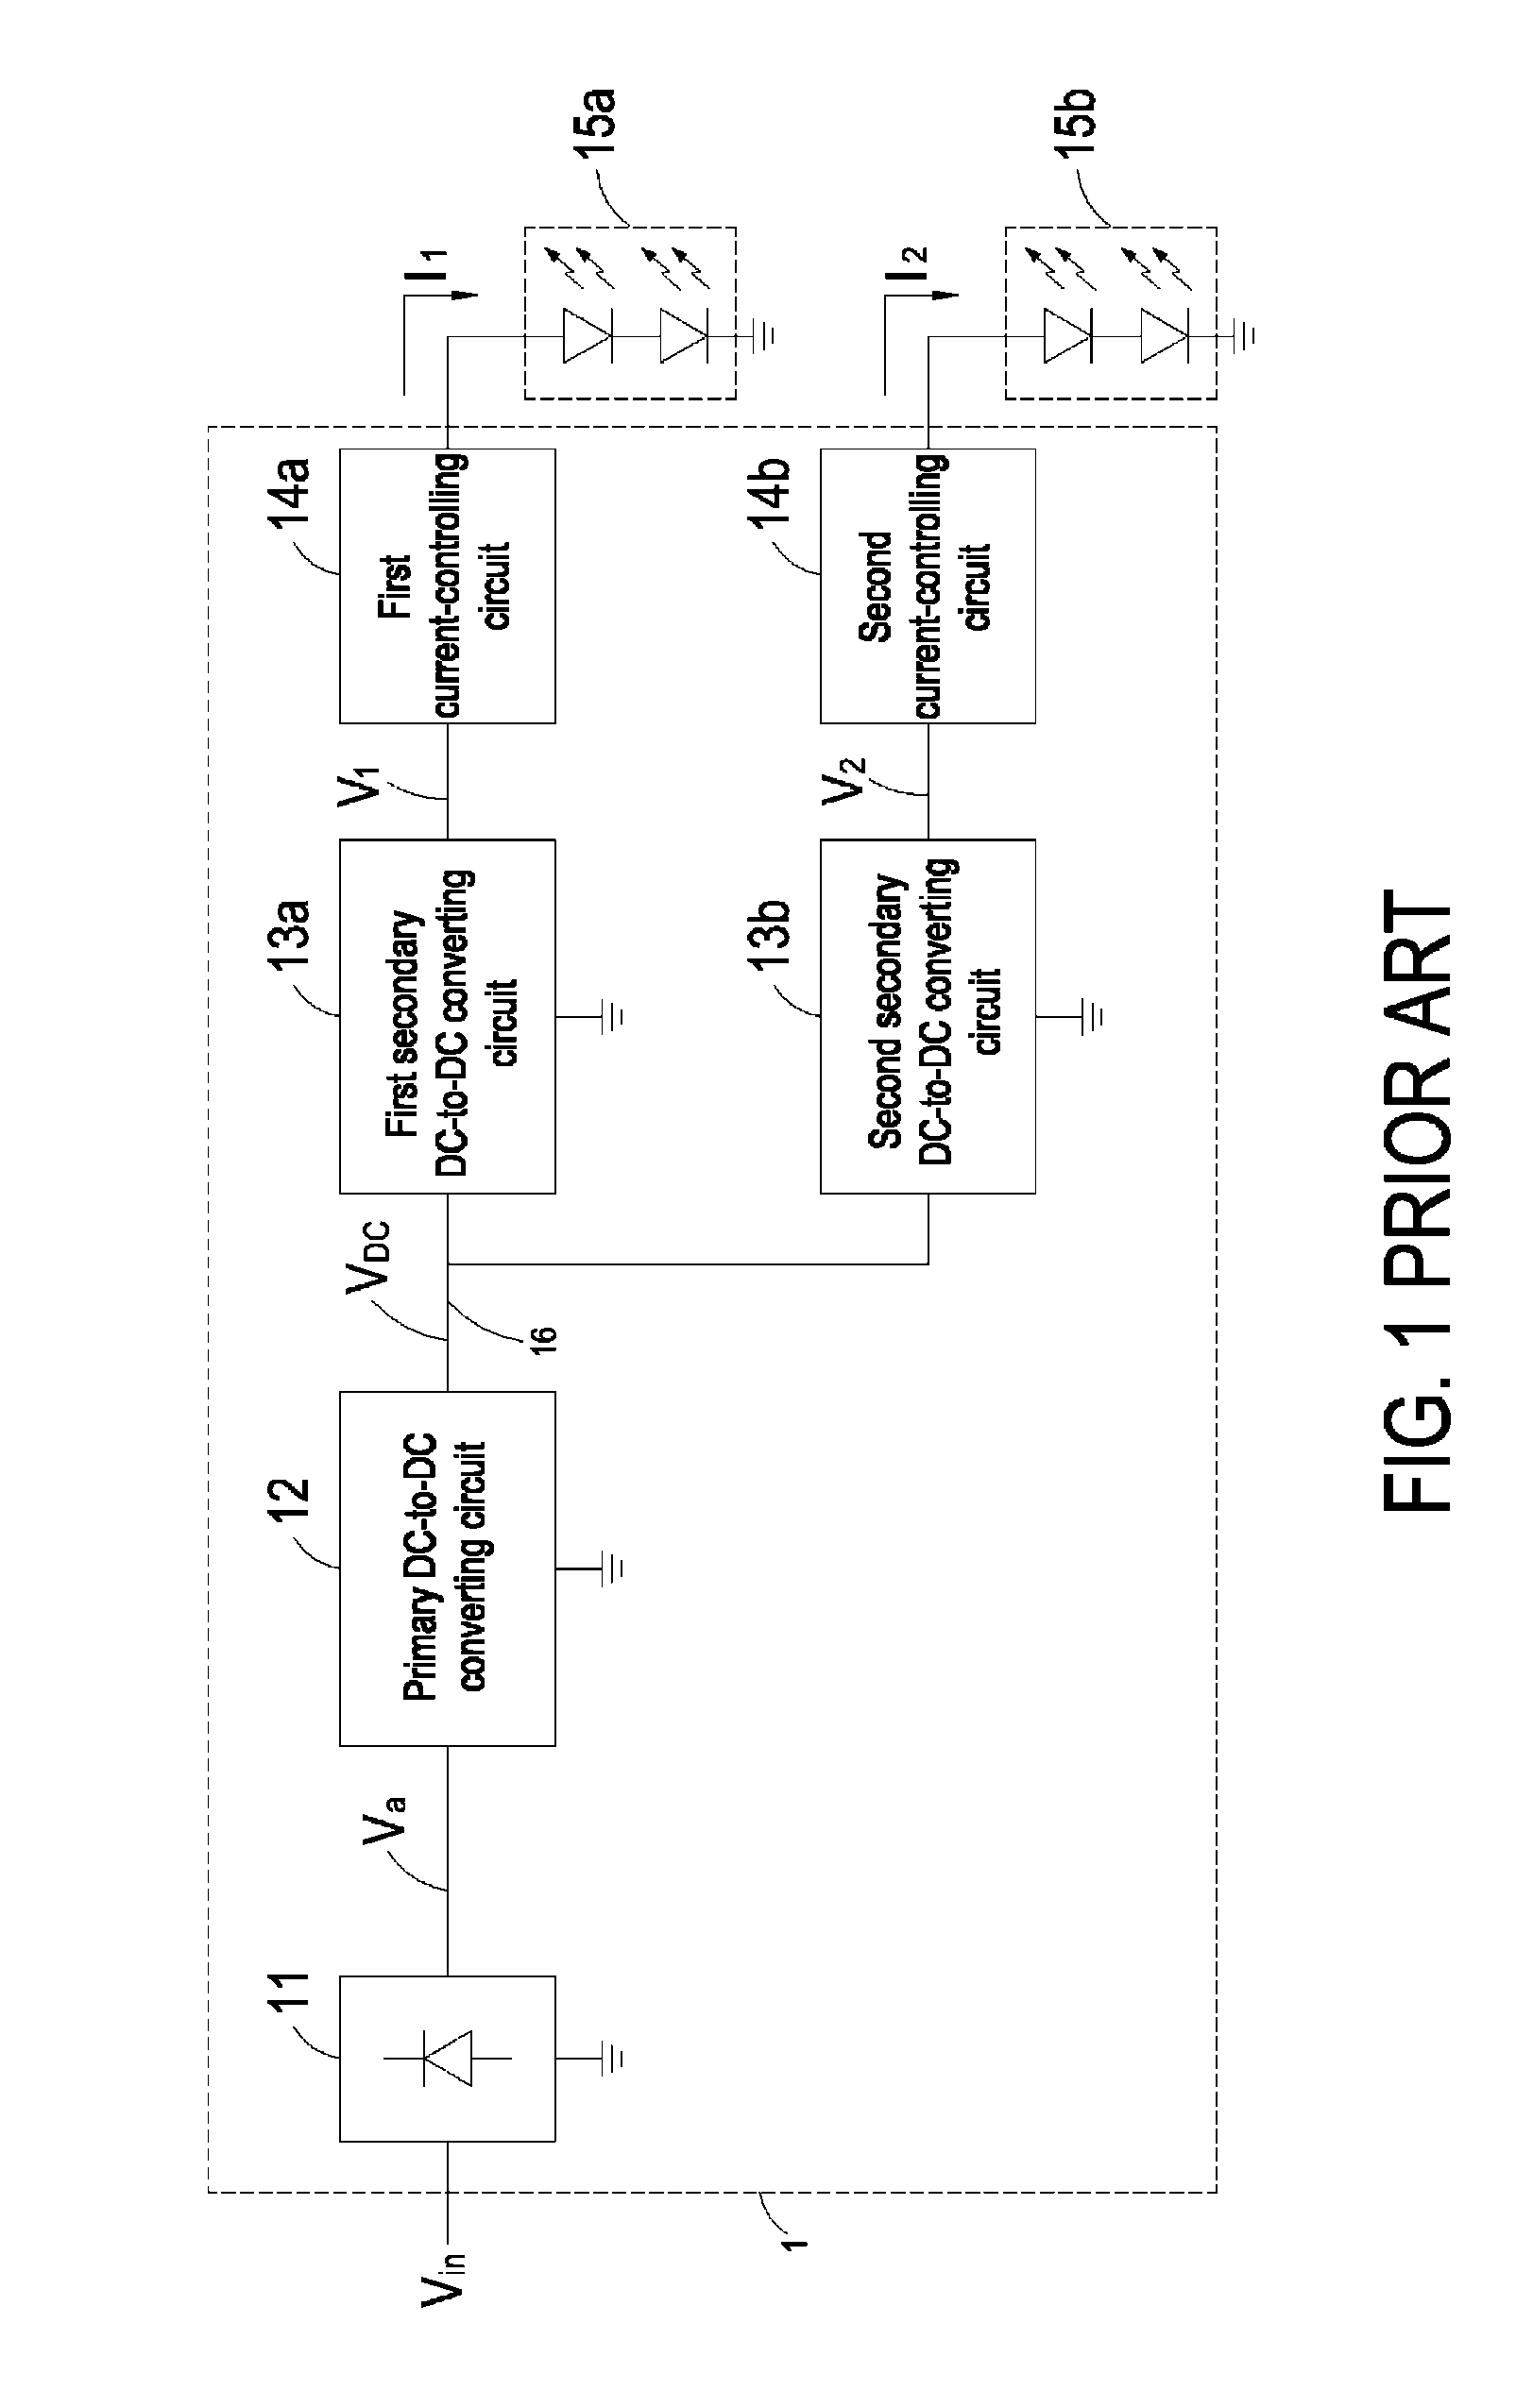 LED current-supplying circuit and LED current-controlling circuit